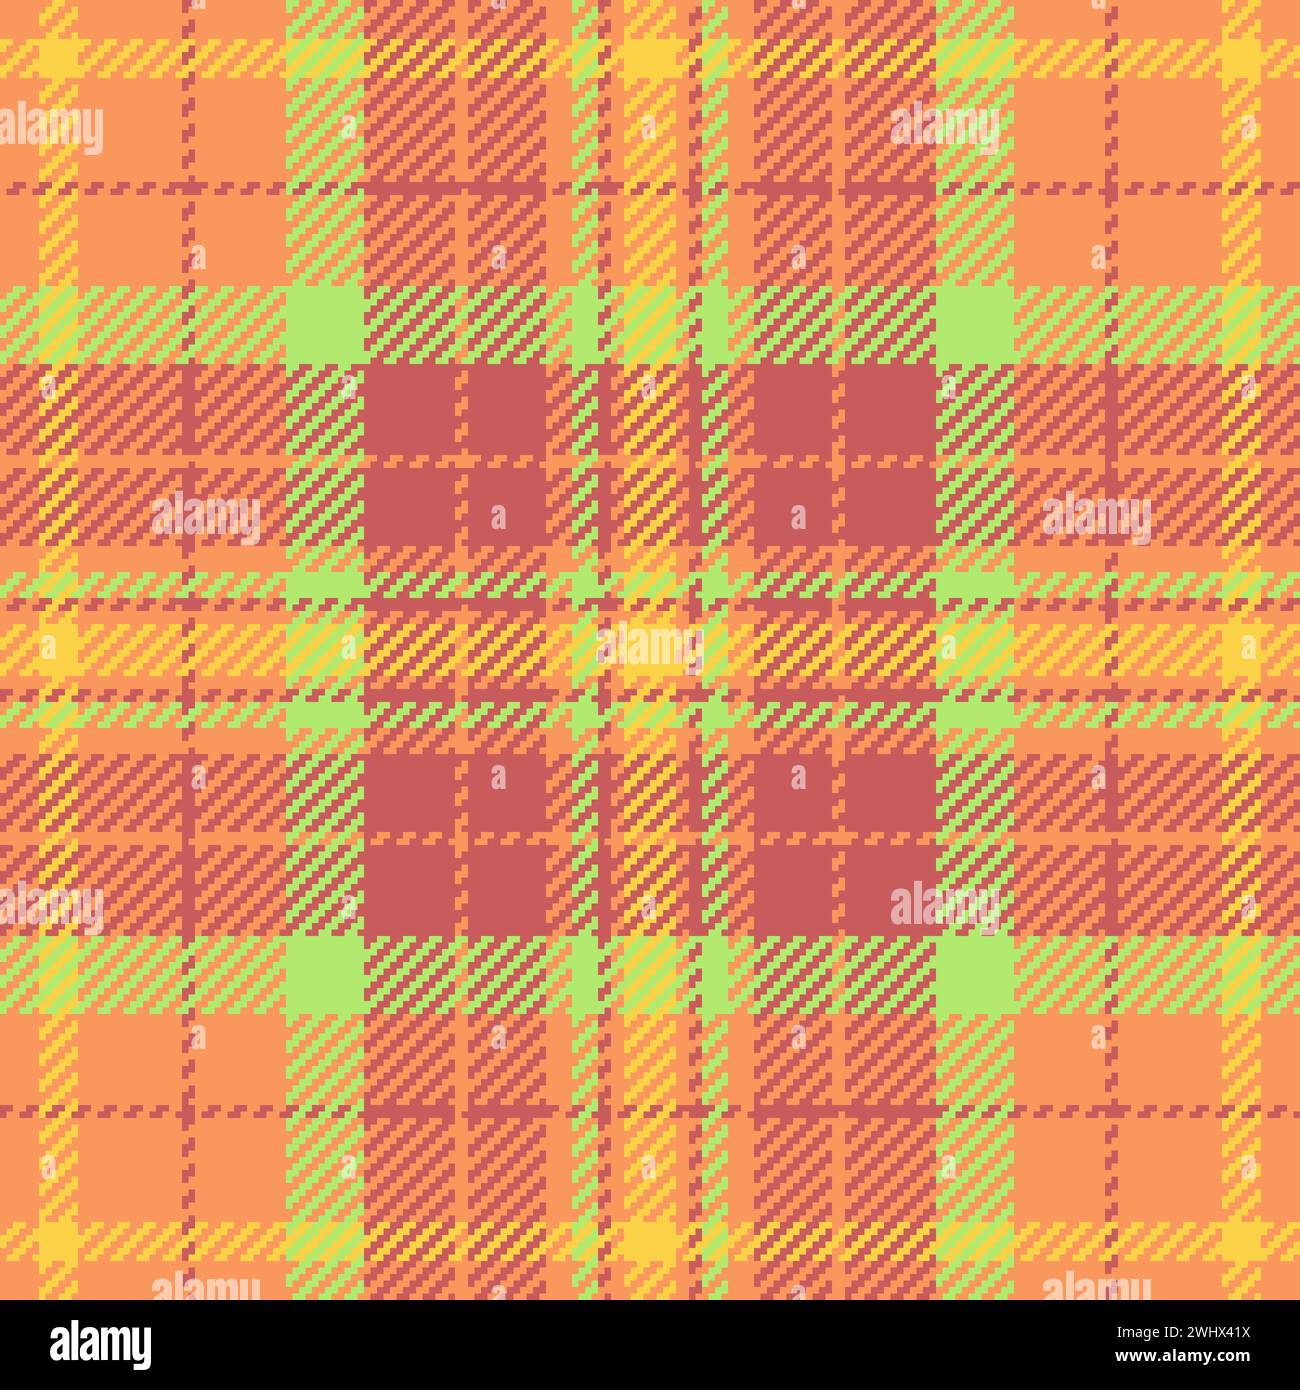 Ornament fabric textile tartan, installing vector plaid seamless. Infant texture background pattern check in orange and indian red colors. Stock Vector